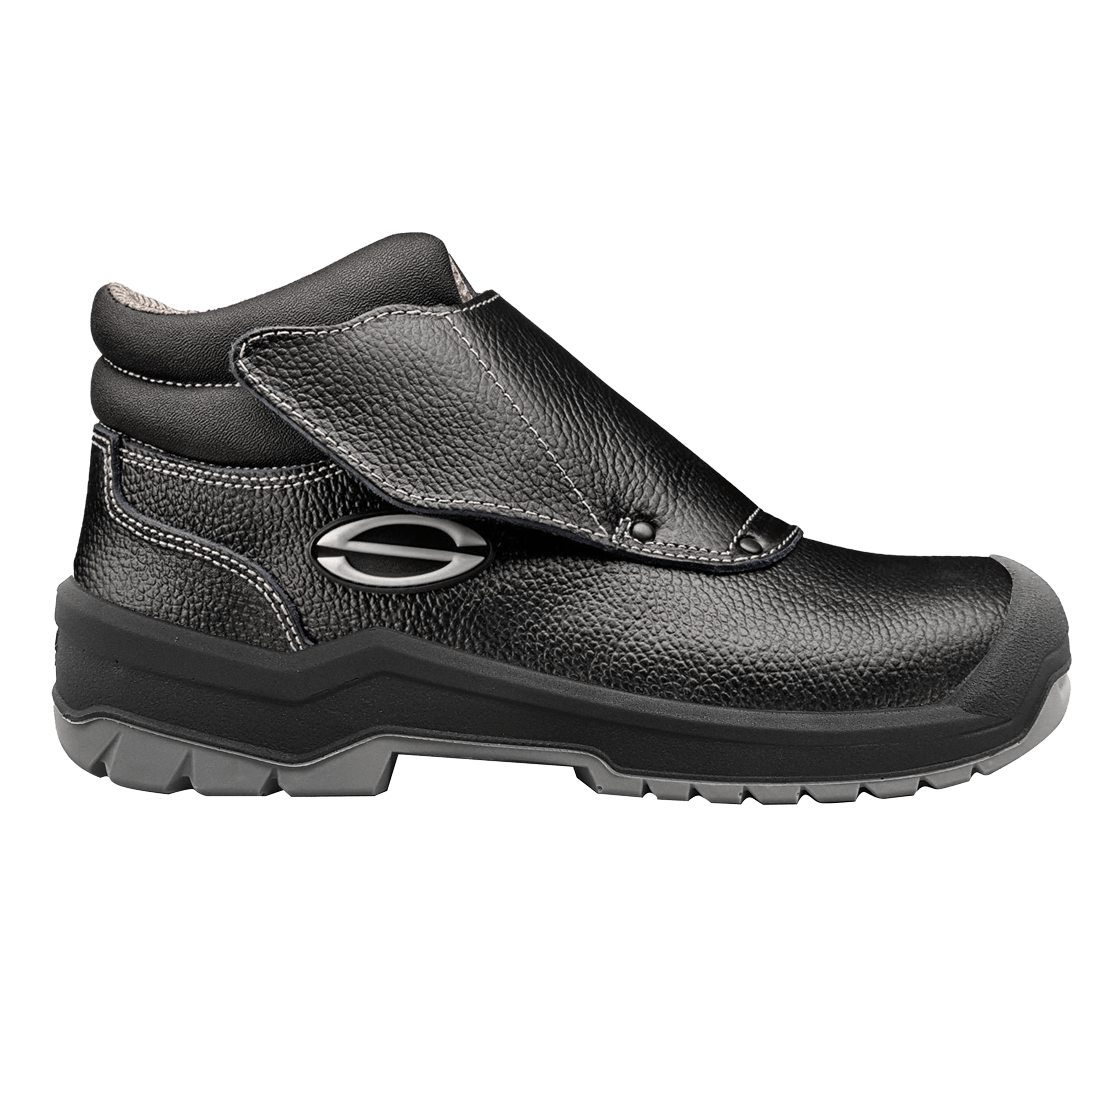 CHAMPION FOBIA ANKLE HIGH SHOE | Sir Safety System